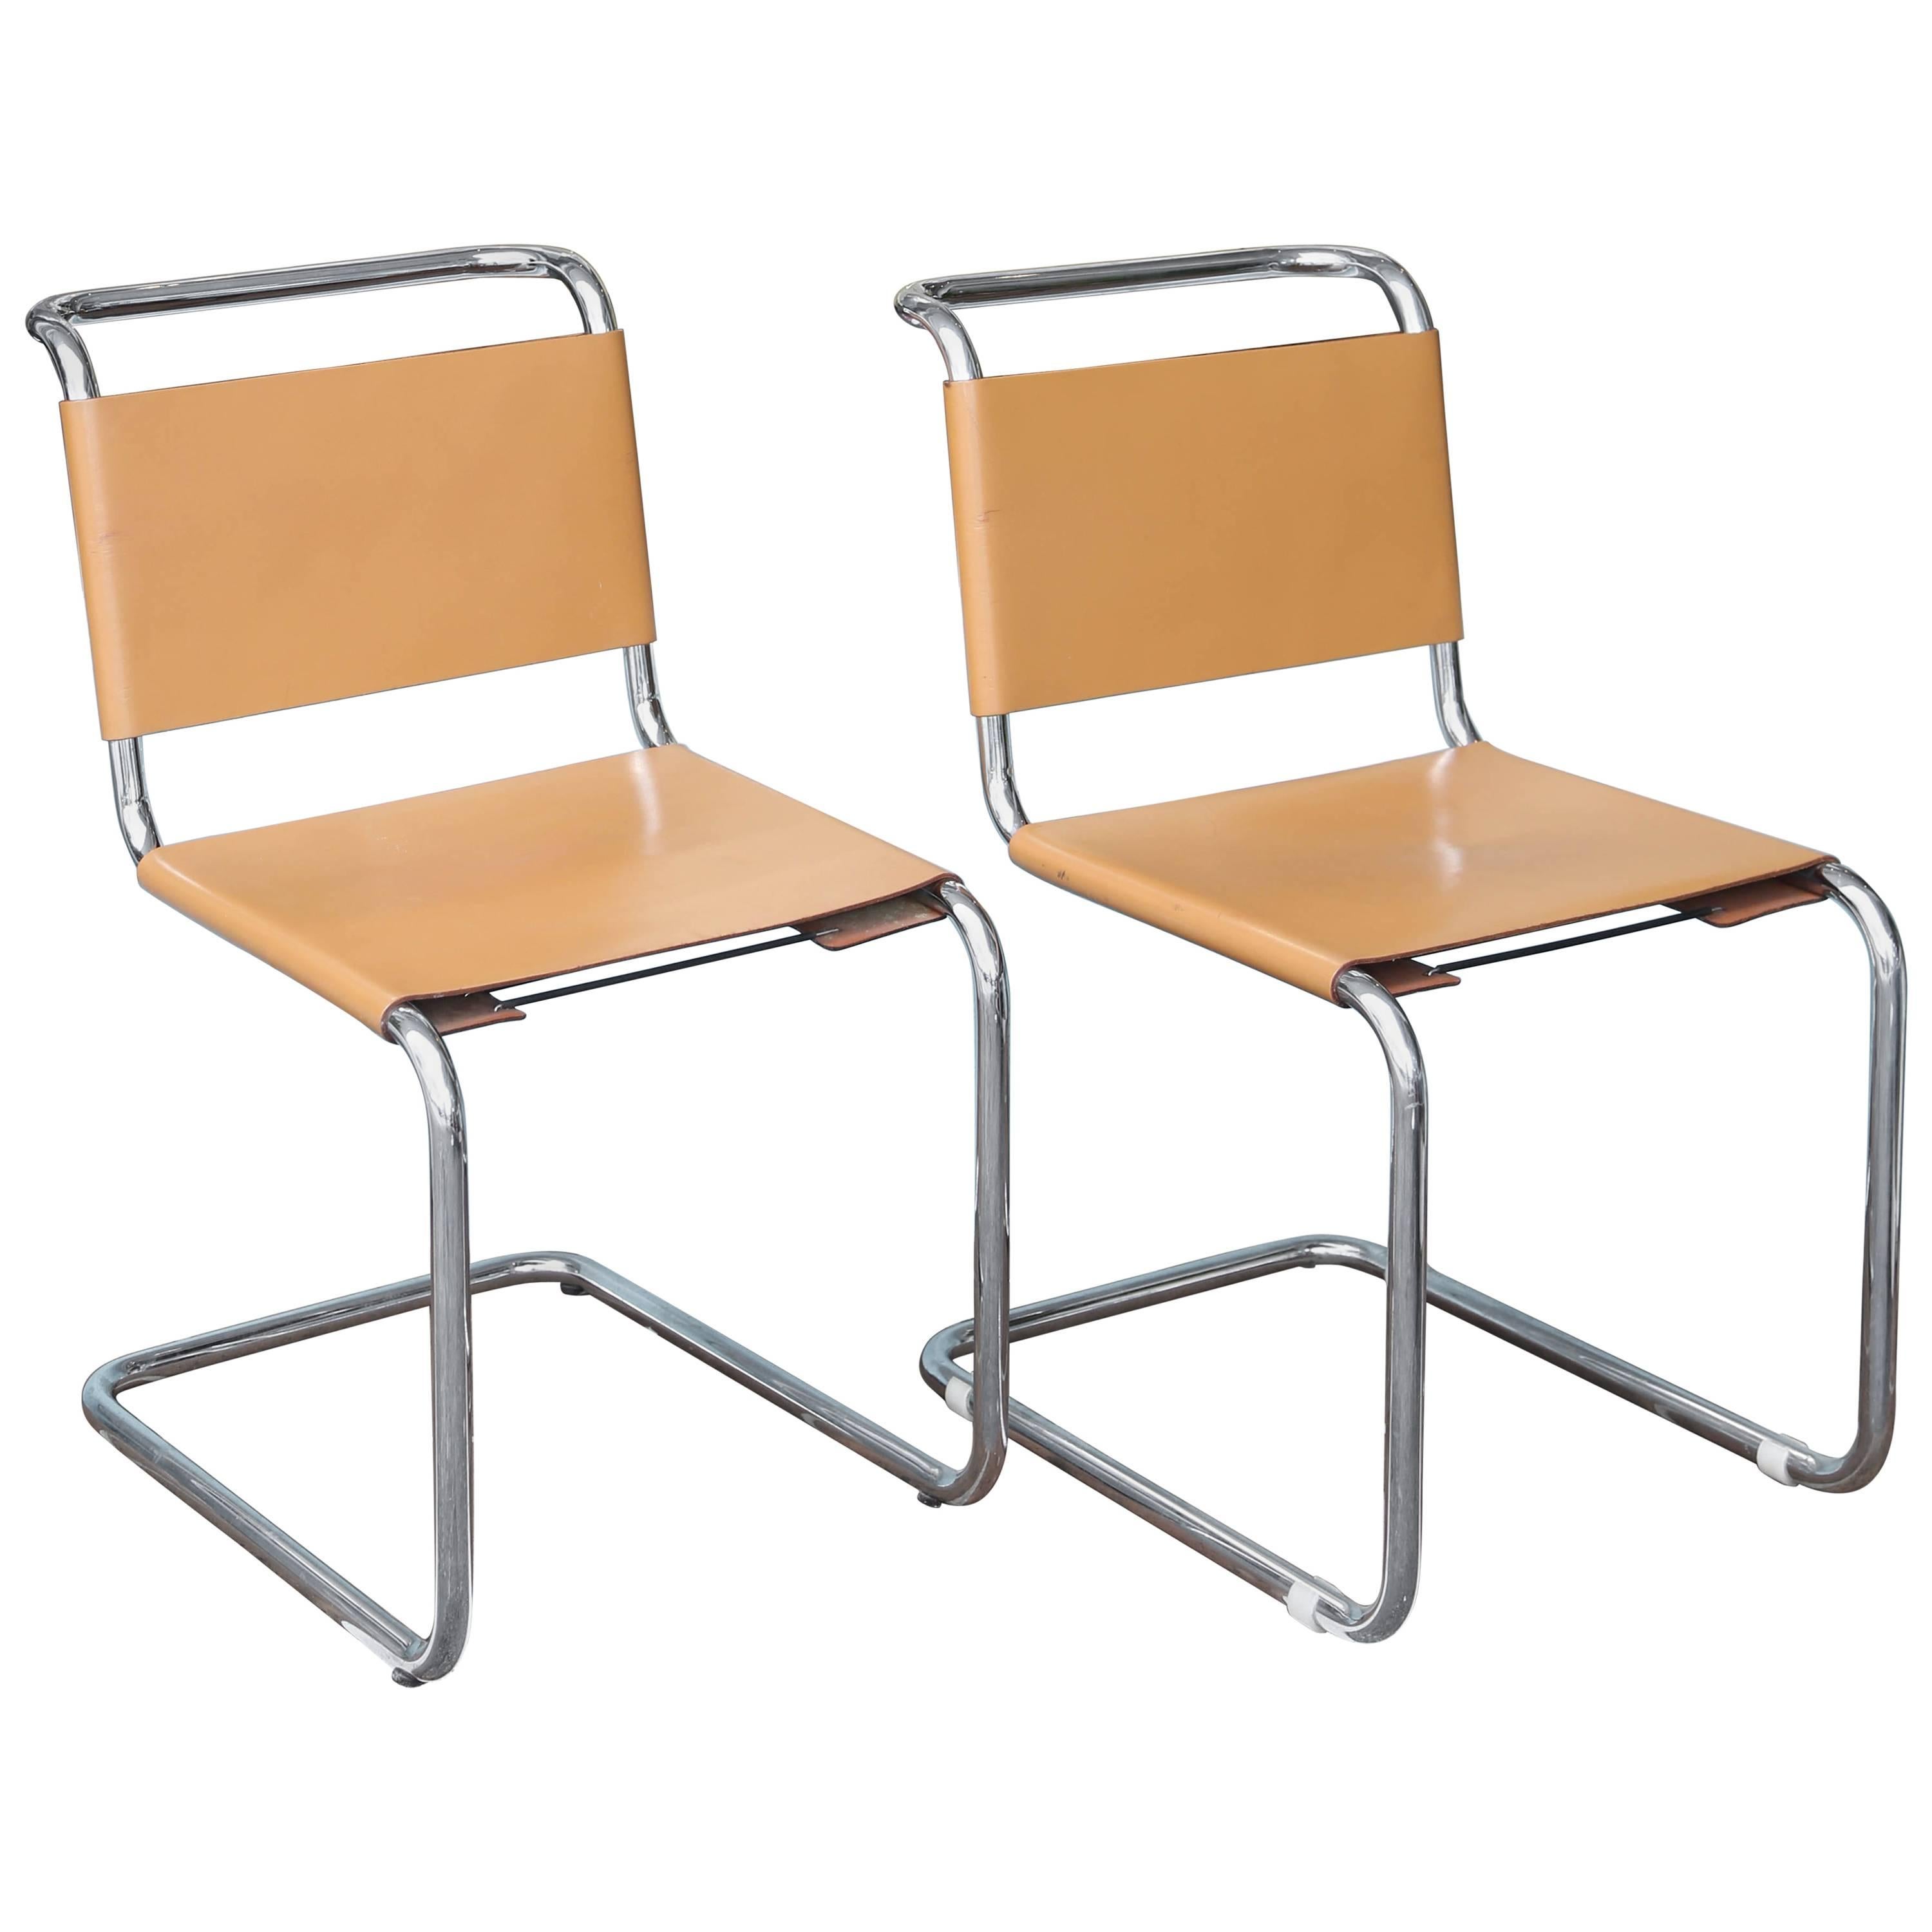 Pair of Knoll Marcel Breuer Cesca Side Chairs